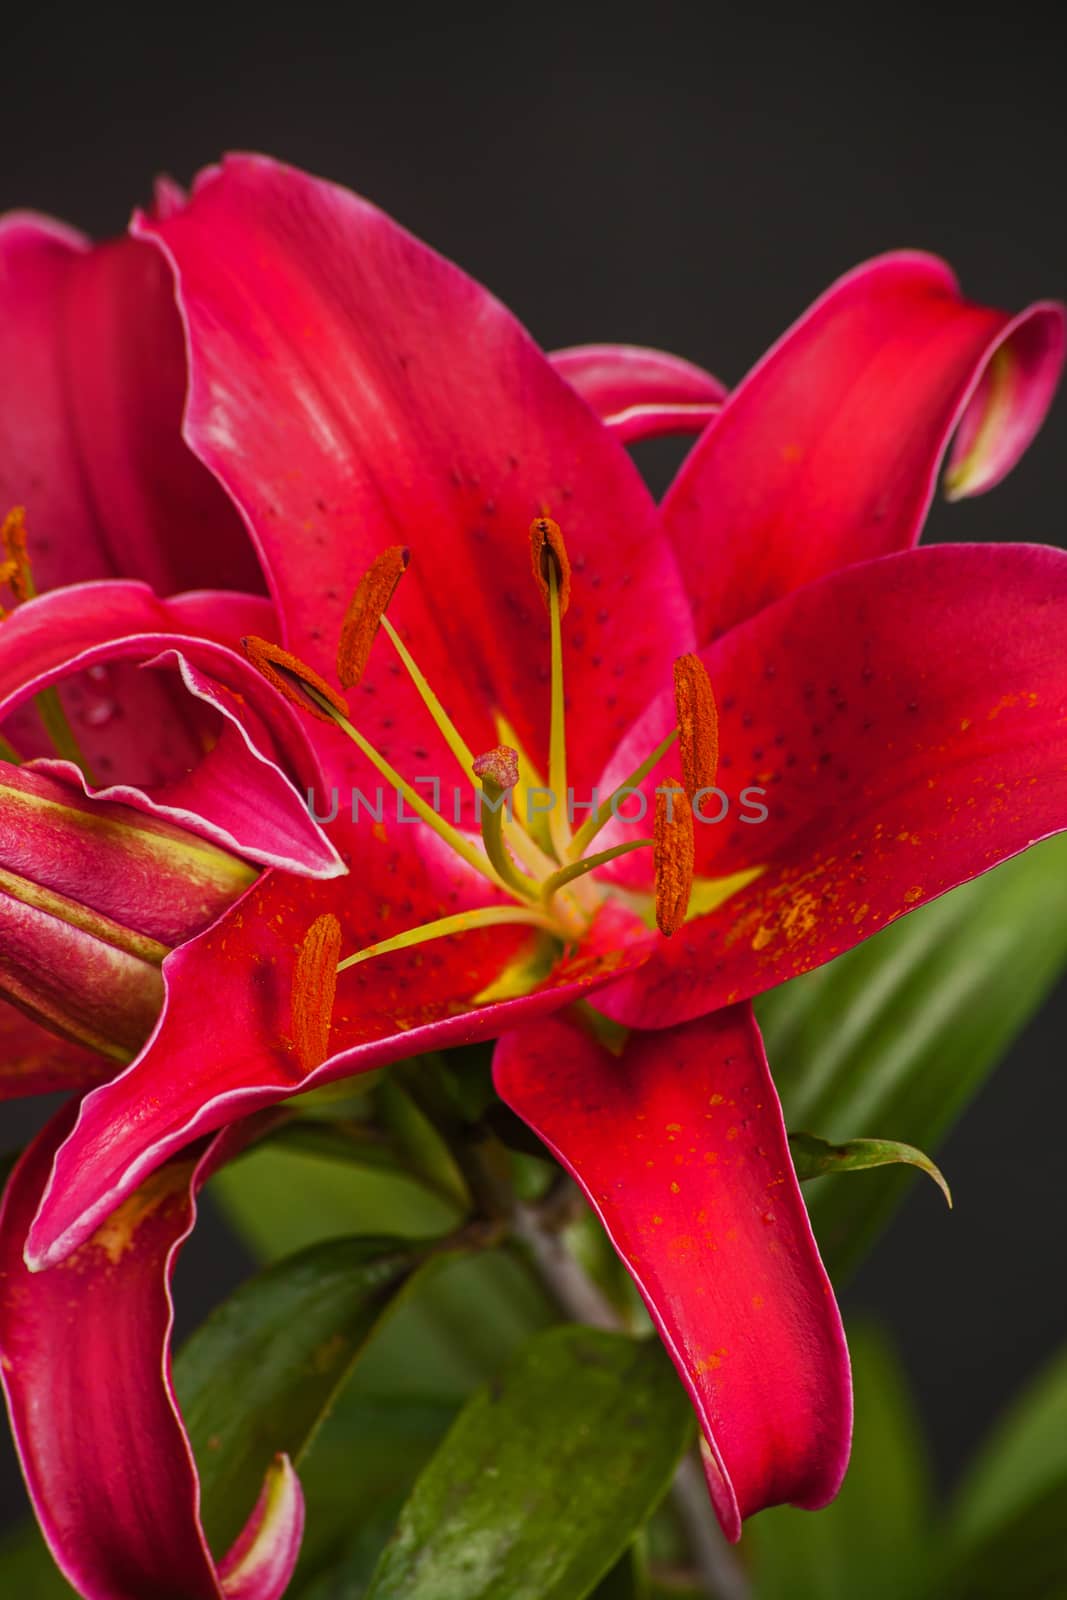 Red Oriental Lily by kobus_peche